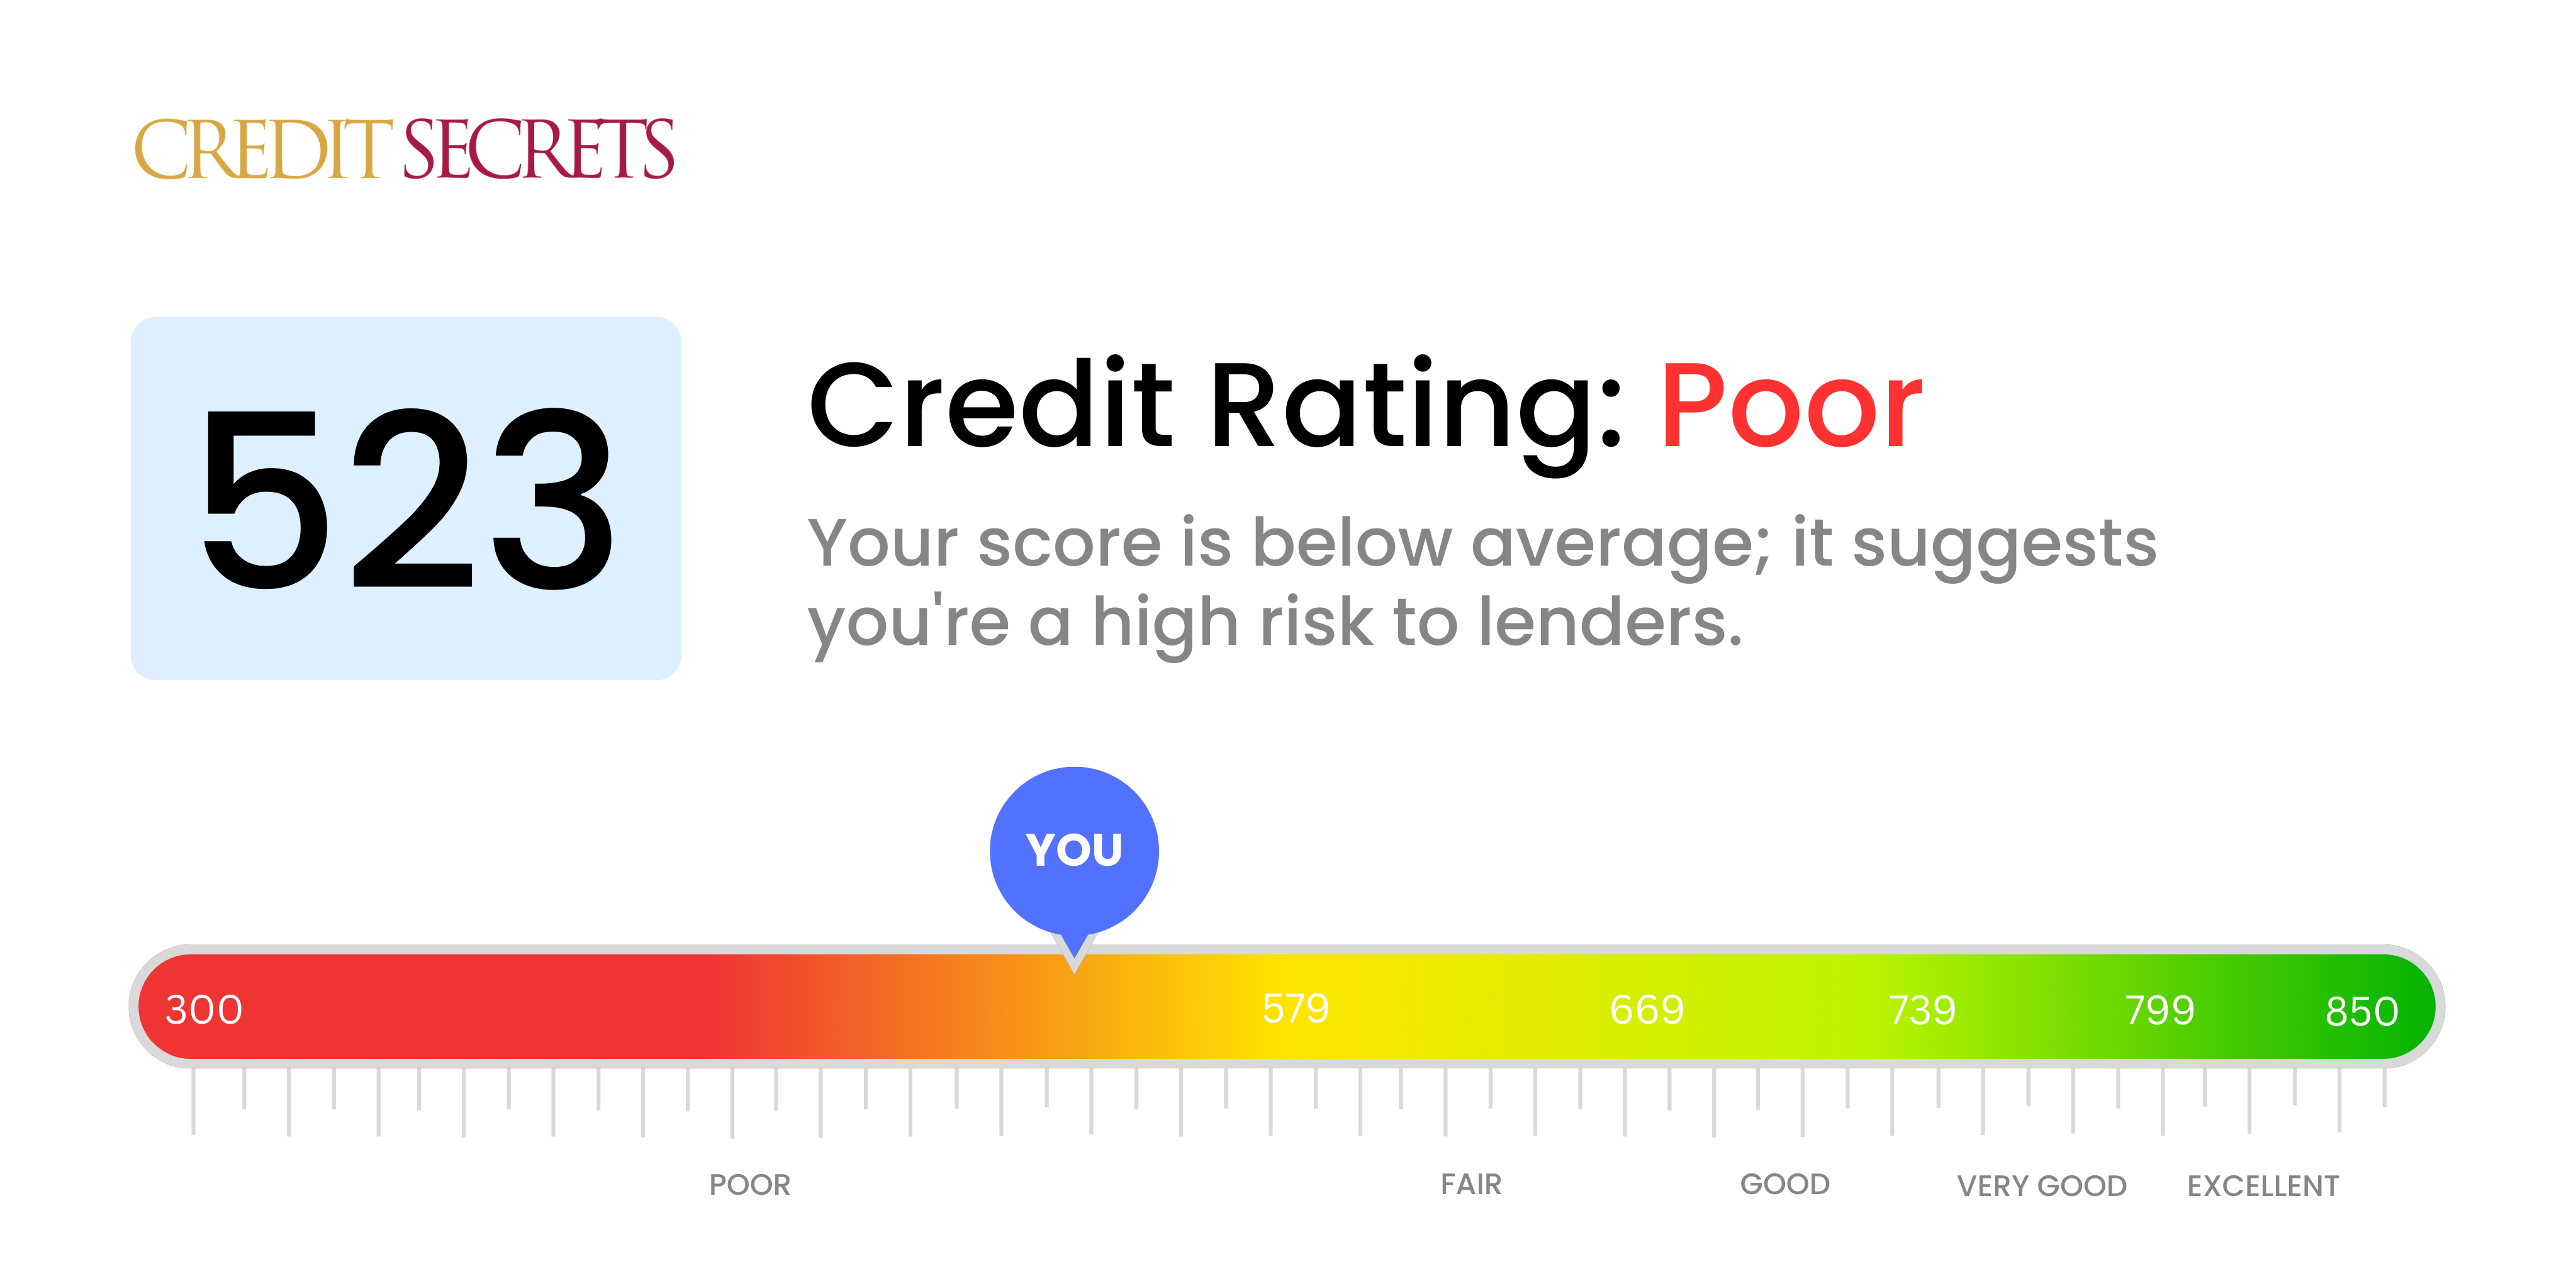 Is 523 a good credit score?